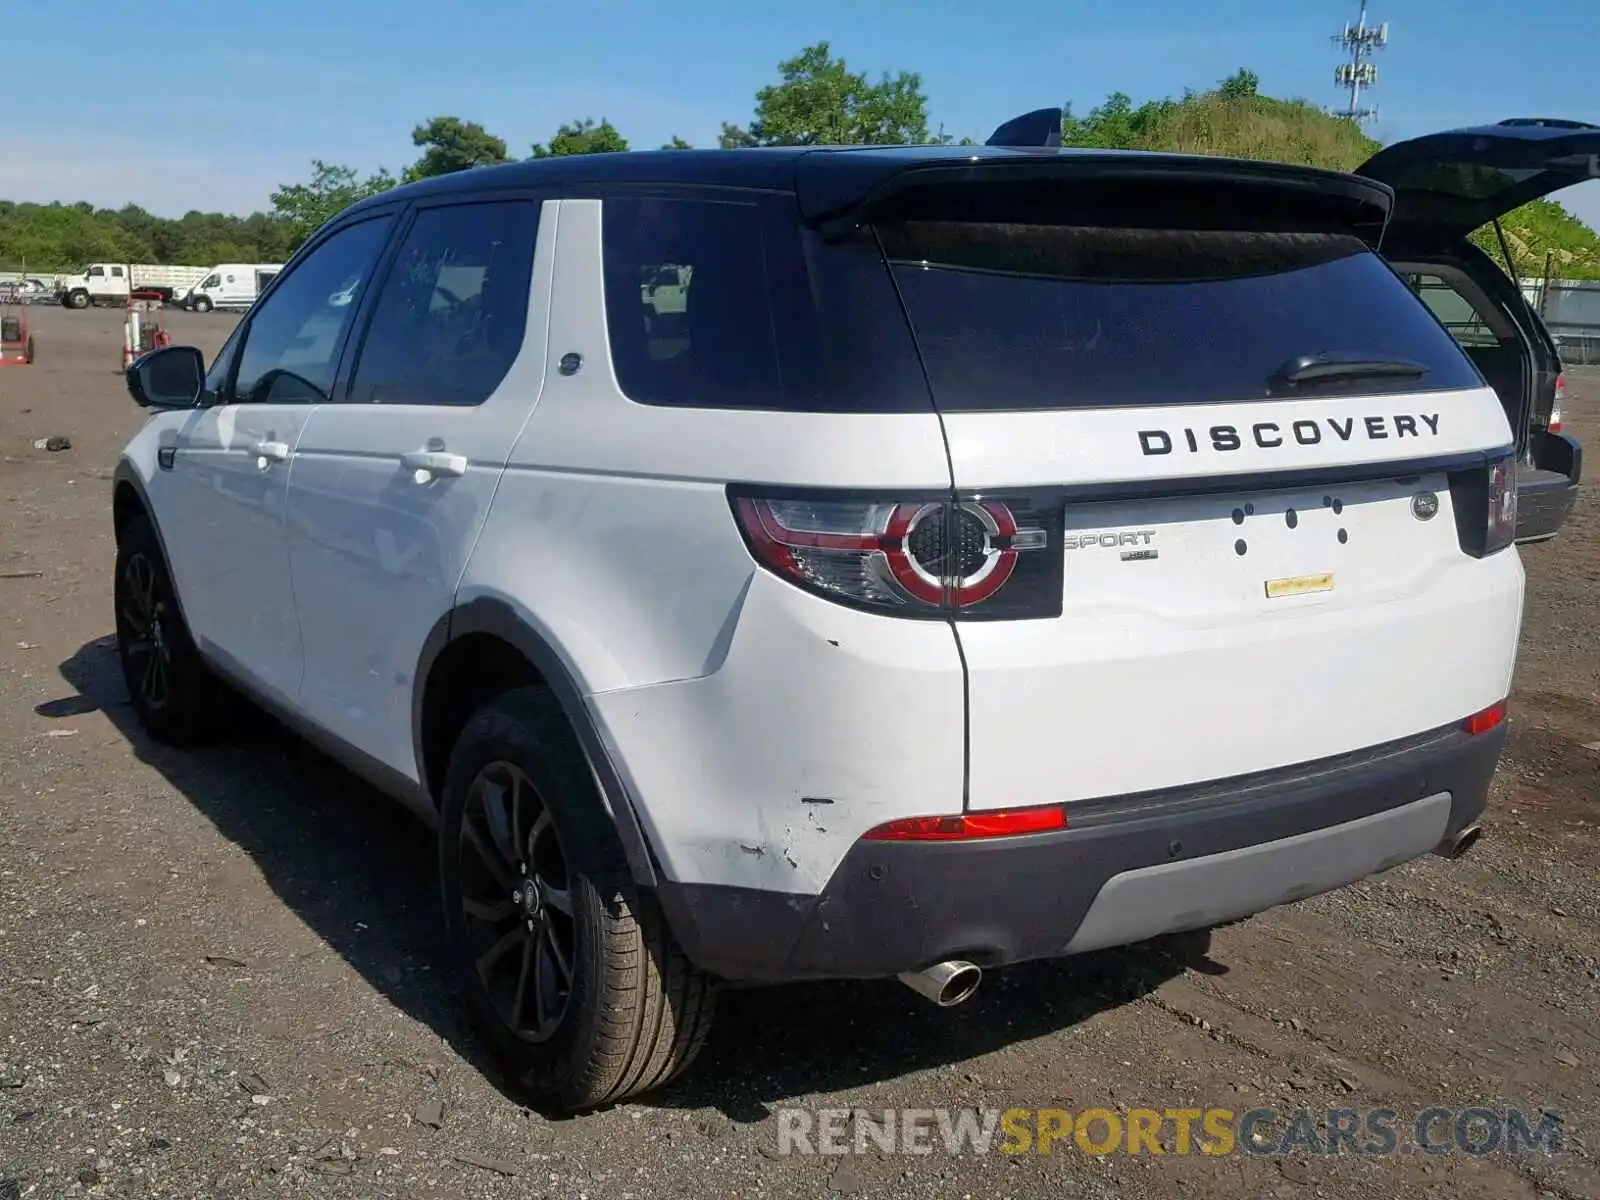 3 Photograph of a damaged car SALCR2FX2KH801061 LAND ROVER DISCOVERY 2019